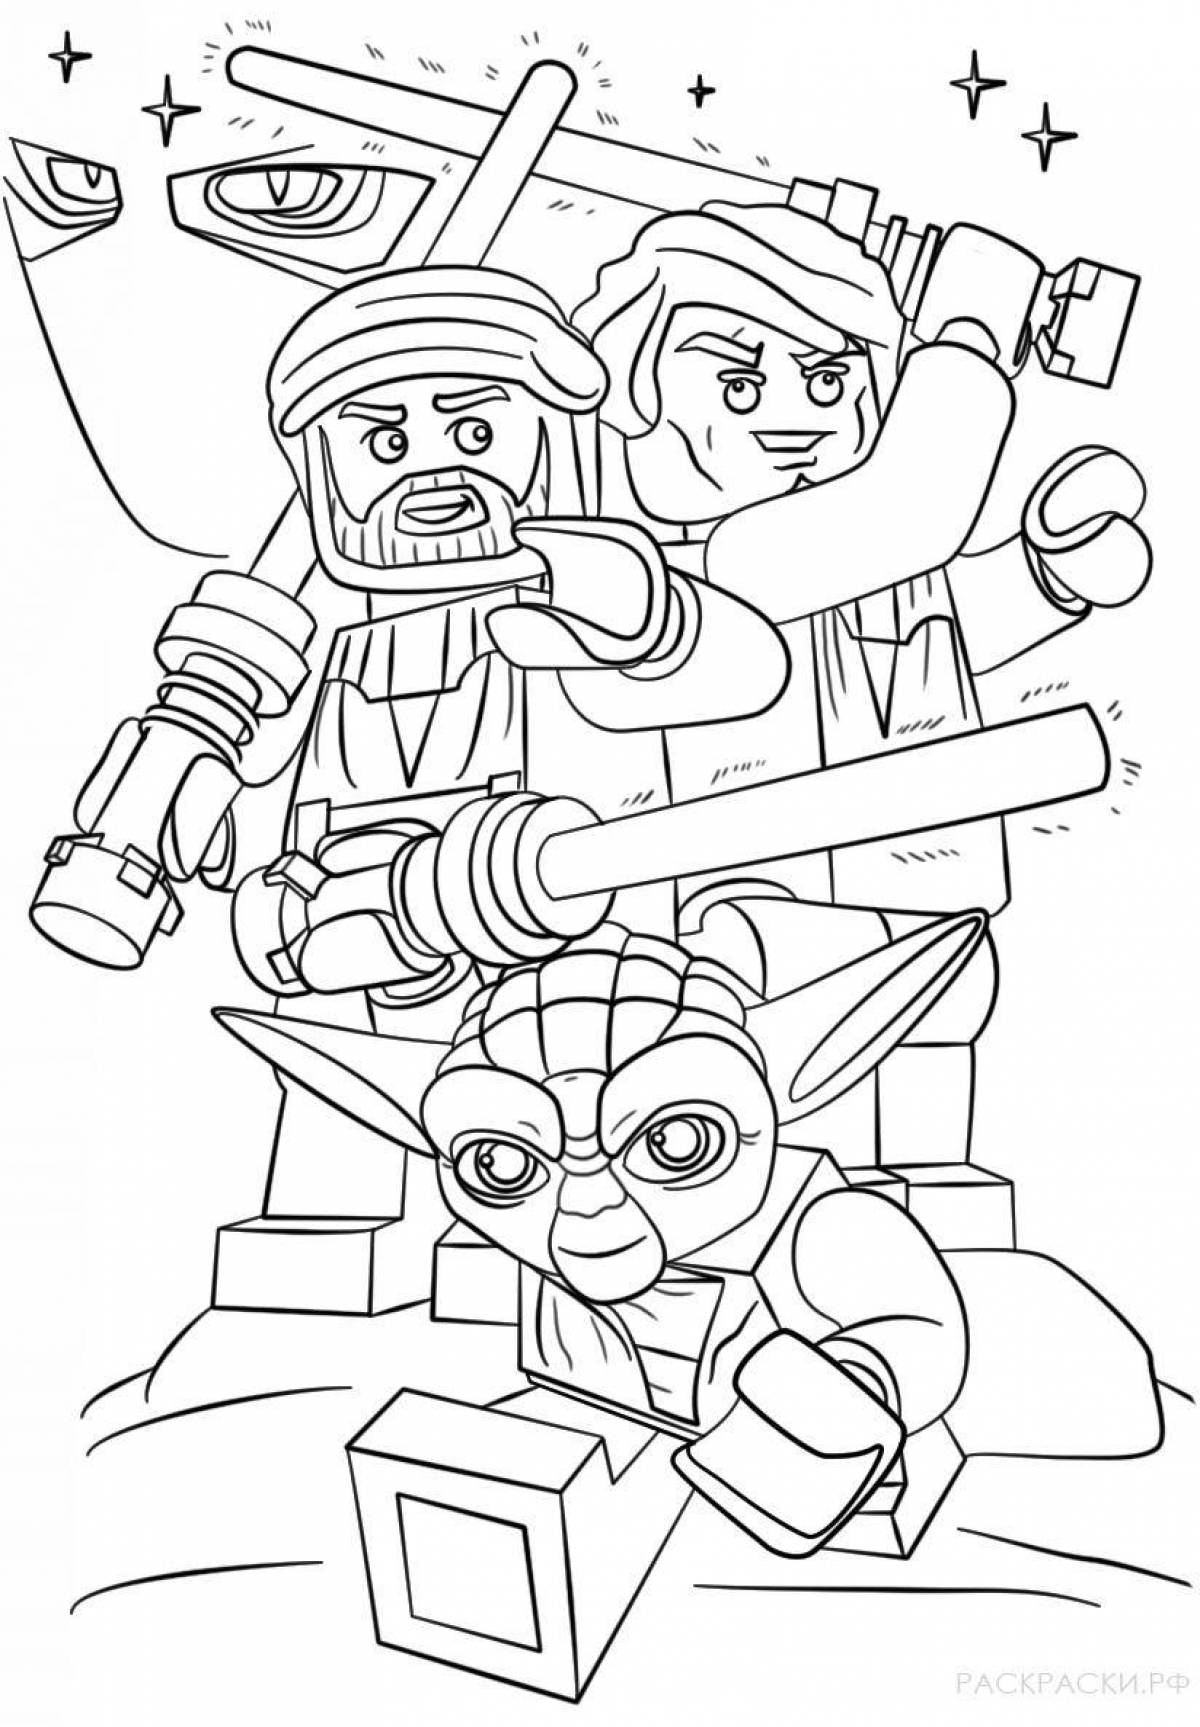 Bright lego star wars coloring page